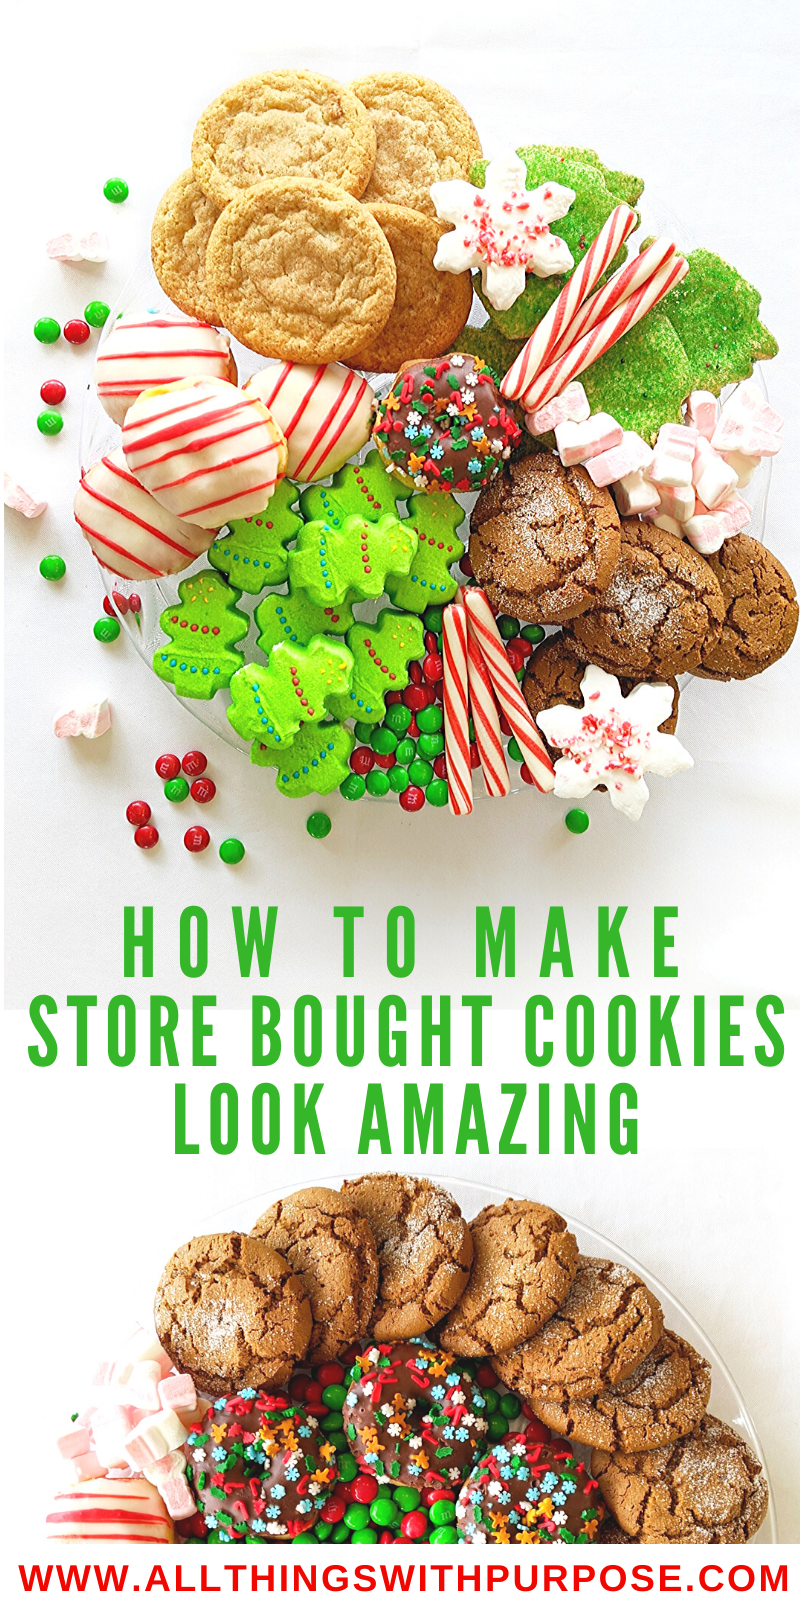 https://www.allthingswithpurpose.com/wp-content/uploads/2019/12/how-to-make-store-bought-cookies-look-amazing.png